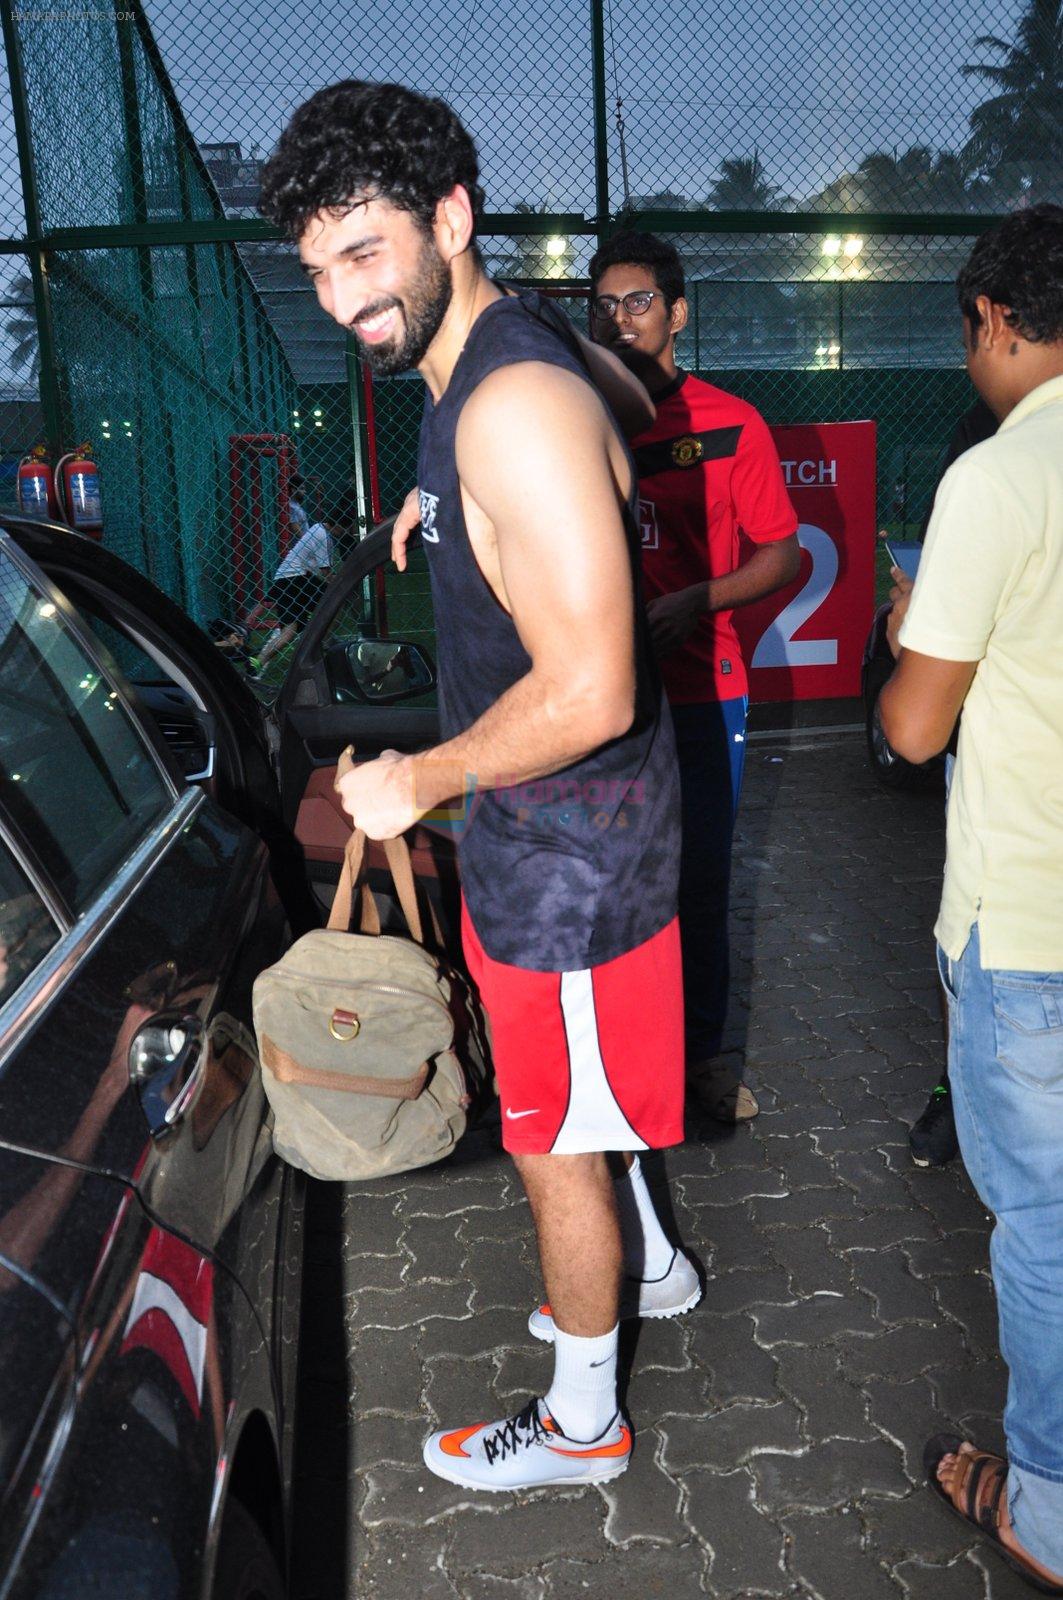 Aditya Roy Kapoor snapped at soccer match on 17th July 2016